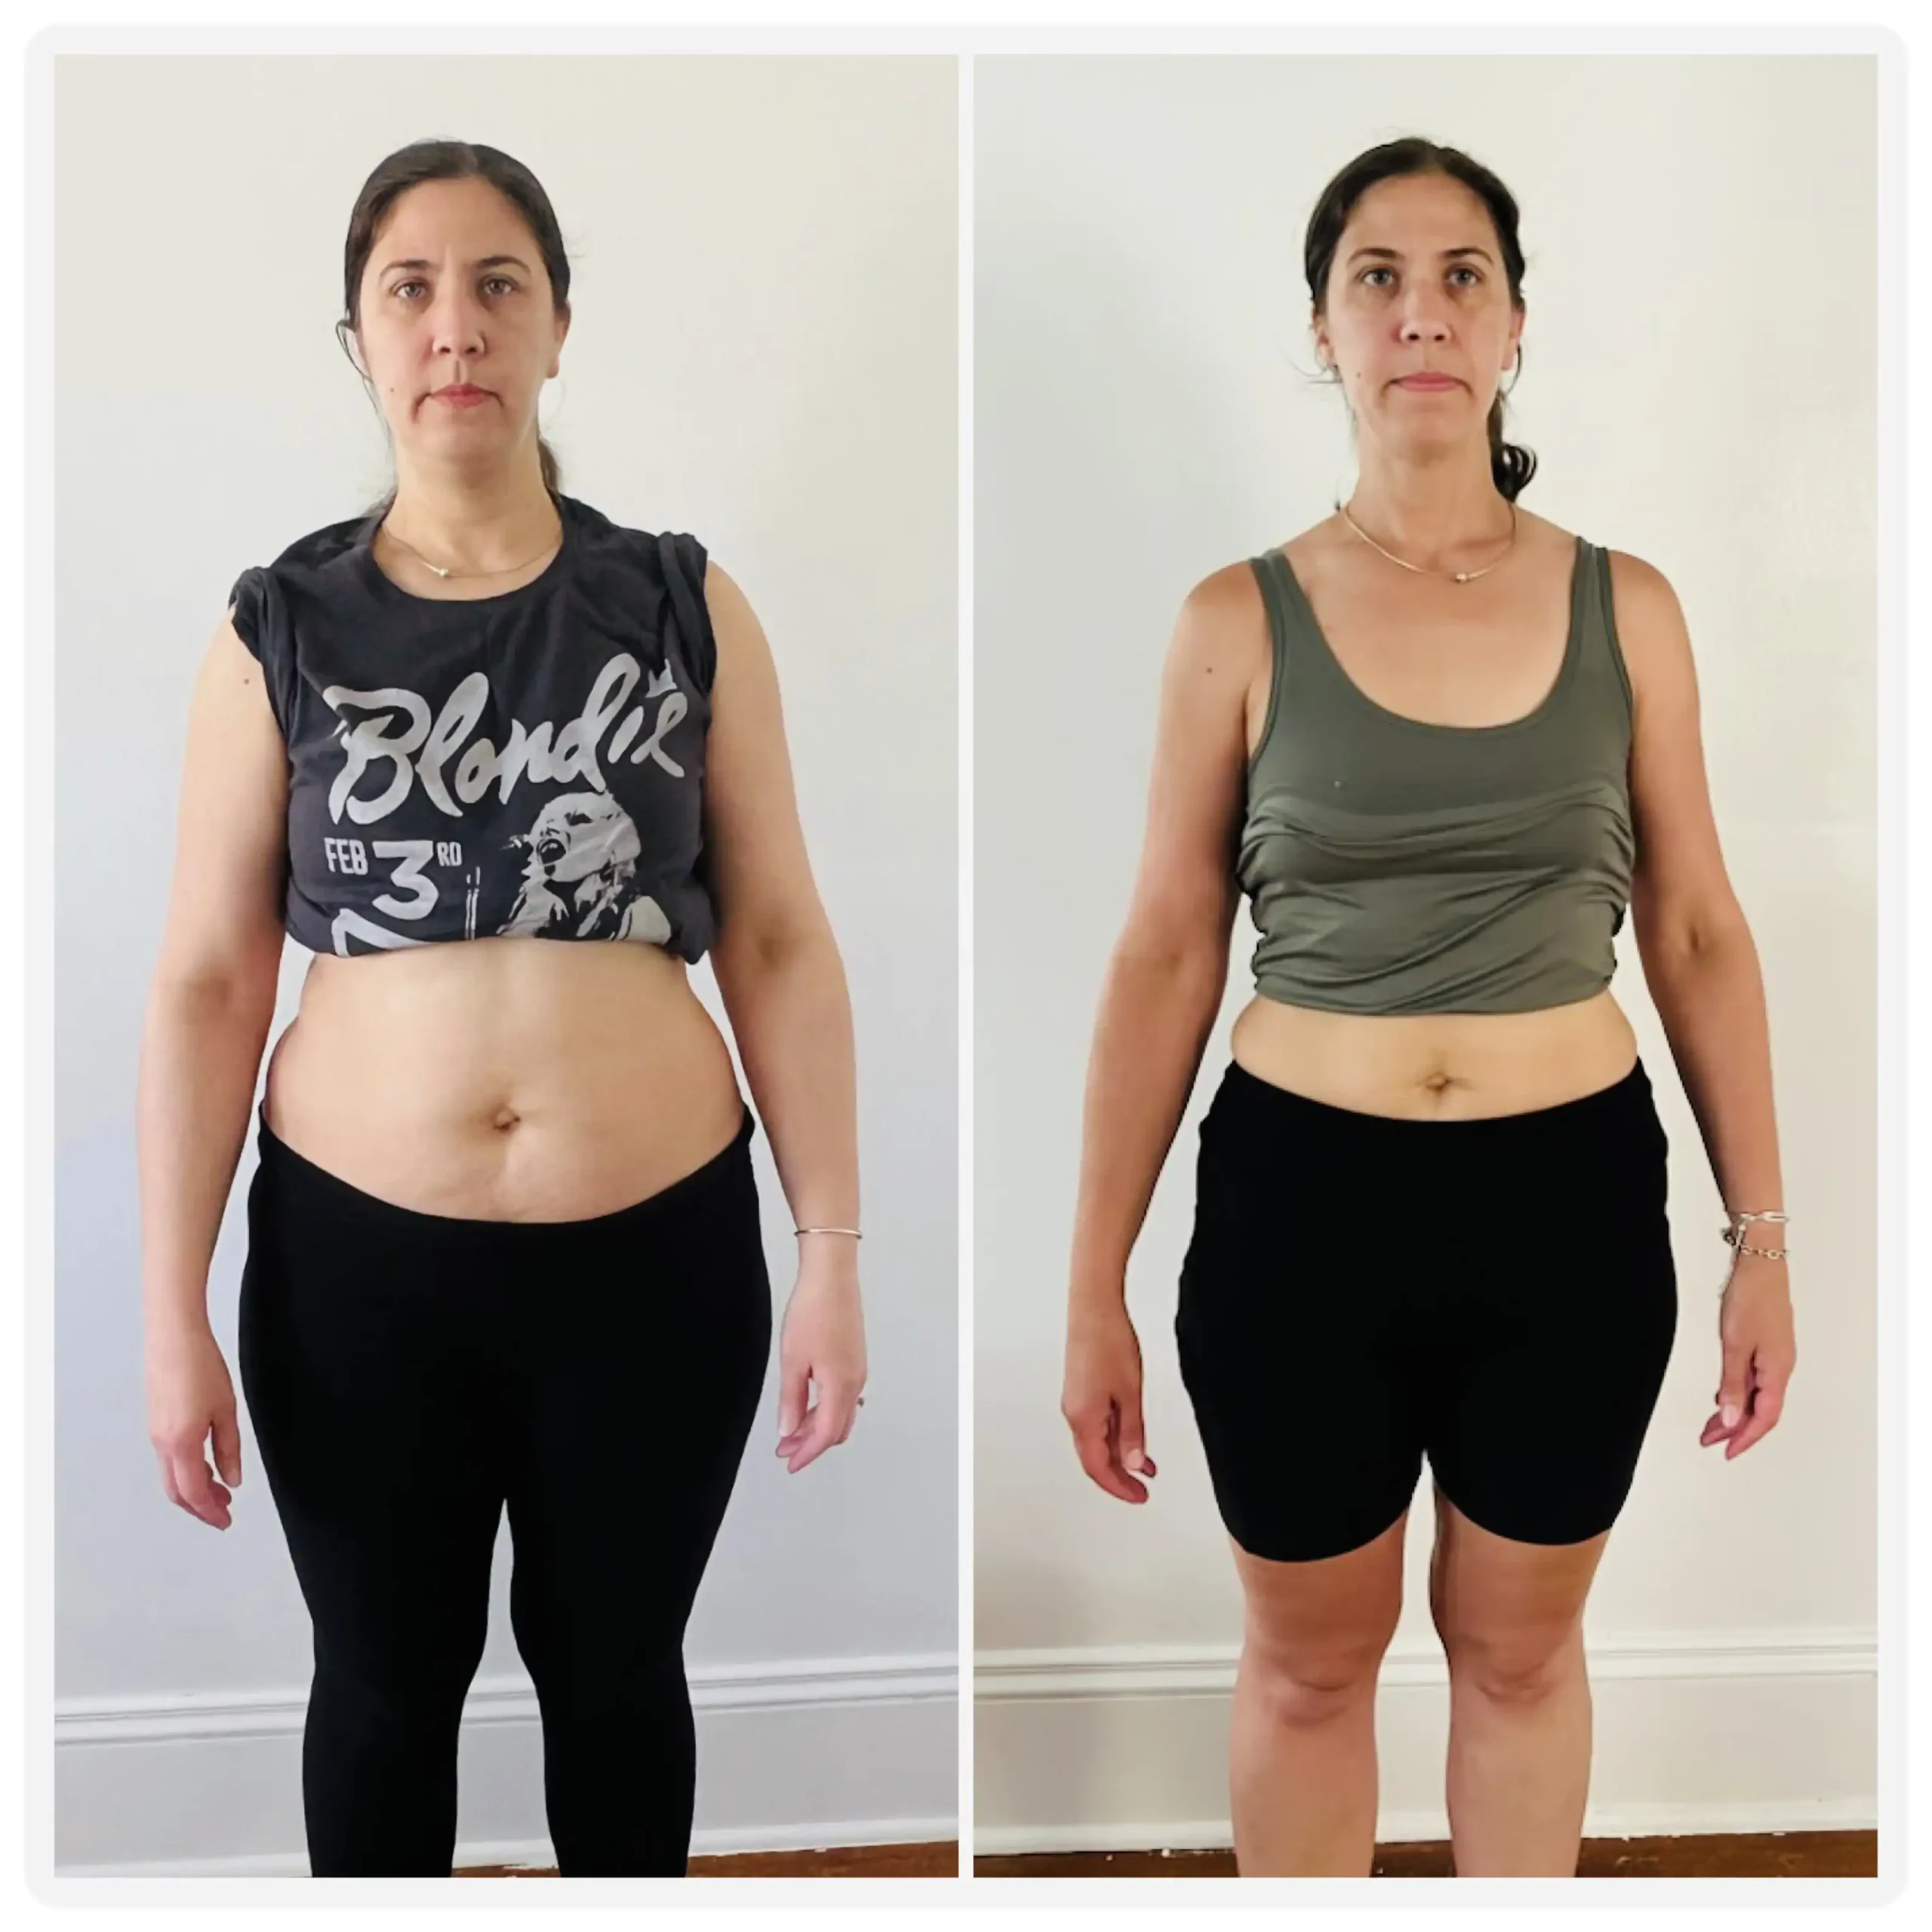 Daliana before and after weight loss front view